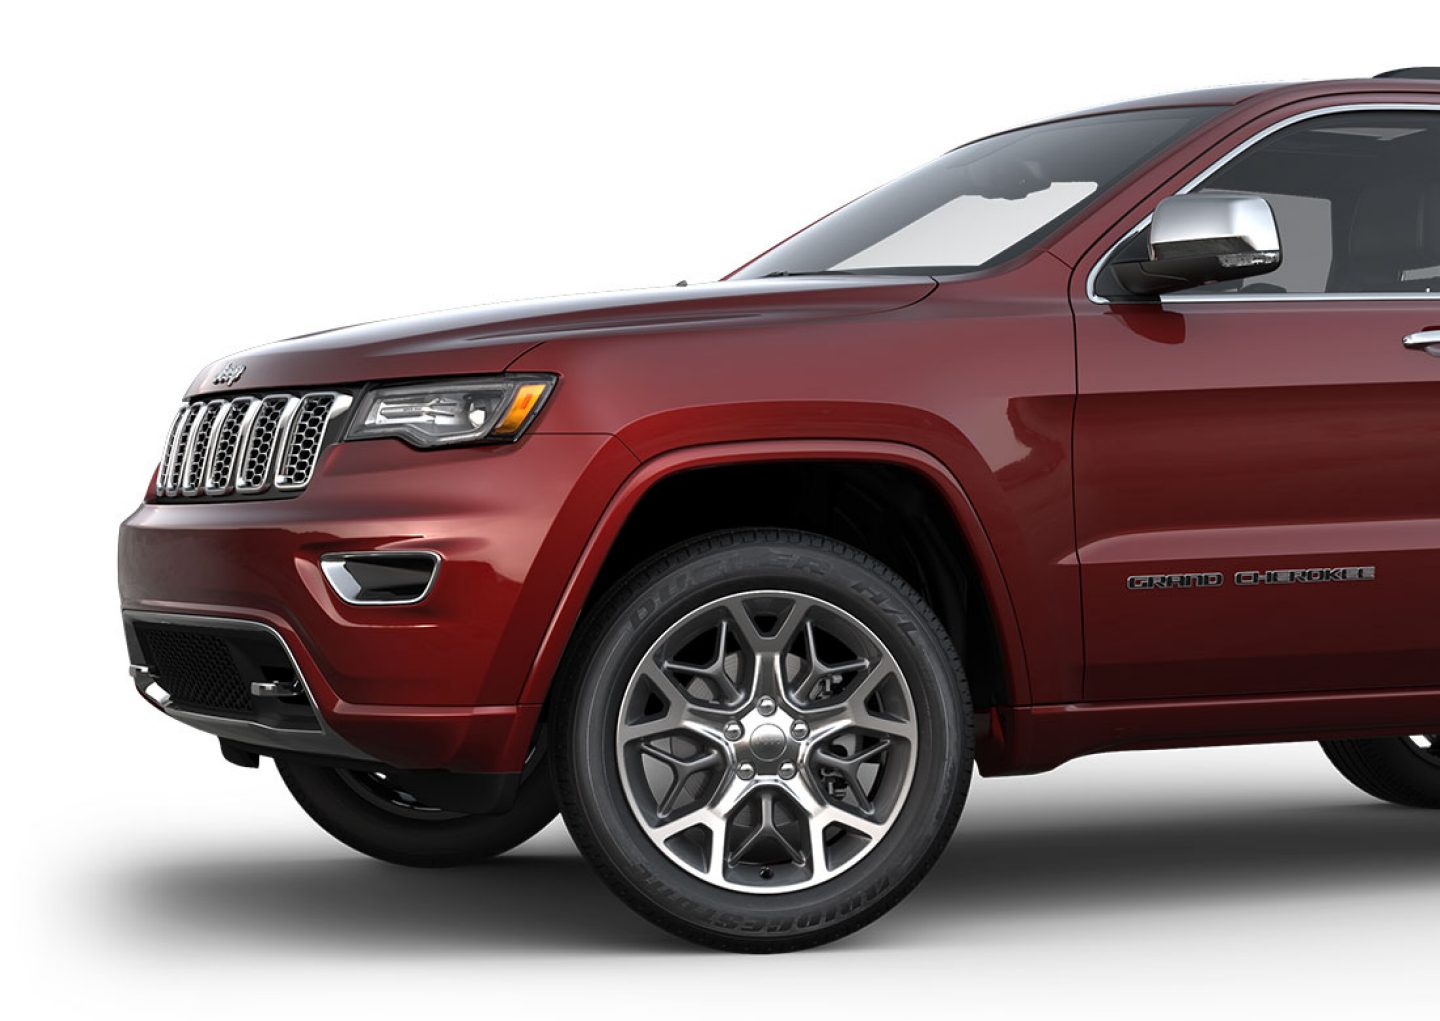 2019-Jeep-Grand-Cherokee-Exterior-Wheels-Overland-20-Inch-Polished-Aluminum-Wheels